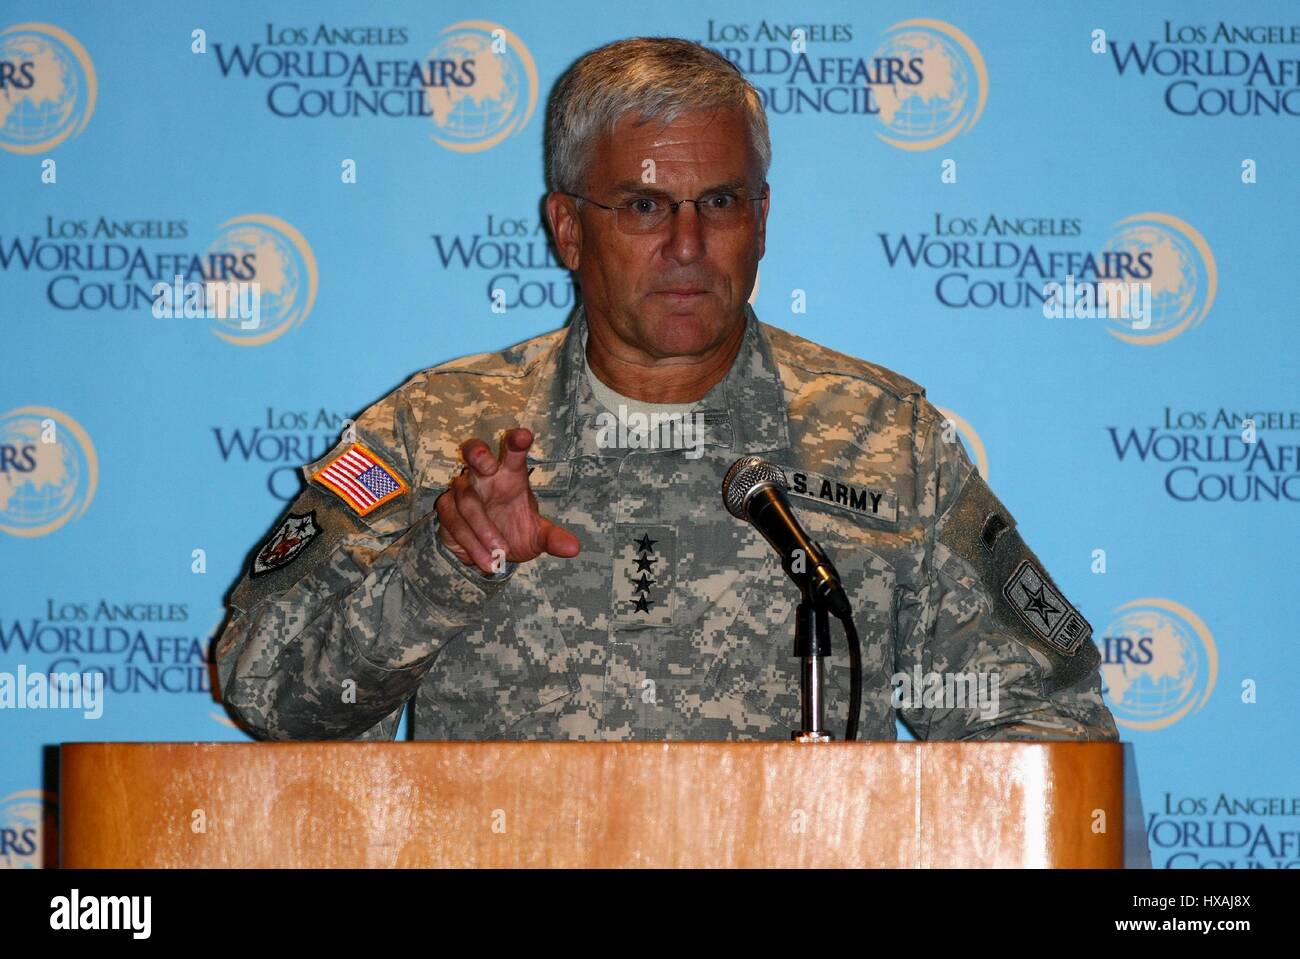 GENERAL GEORGE W. CASEY & JR CHIEF OF STAFF THE U.S. ARMY 27 September 2007 DOWNTOWN LOS ANGELES USA Stock Photo